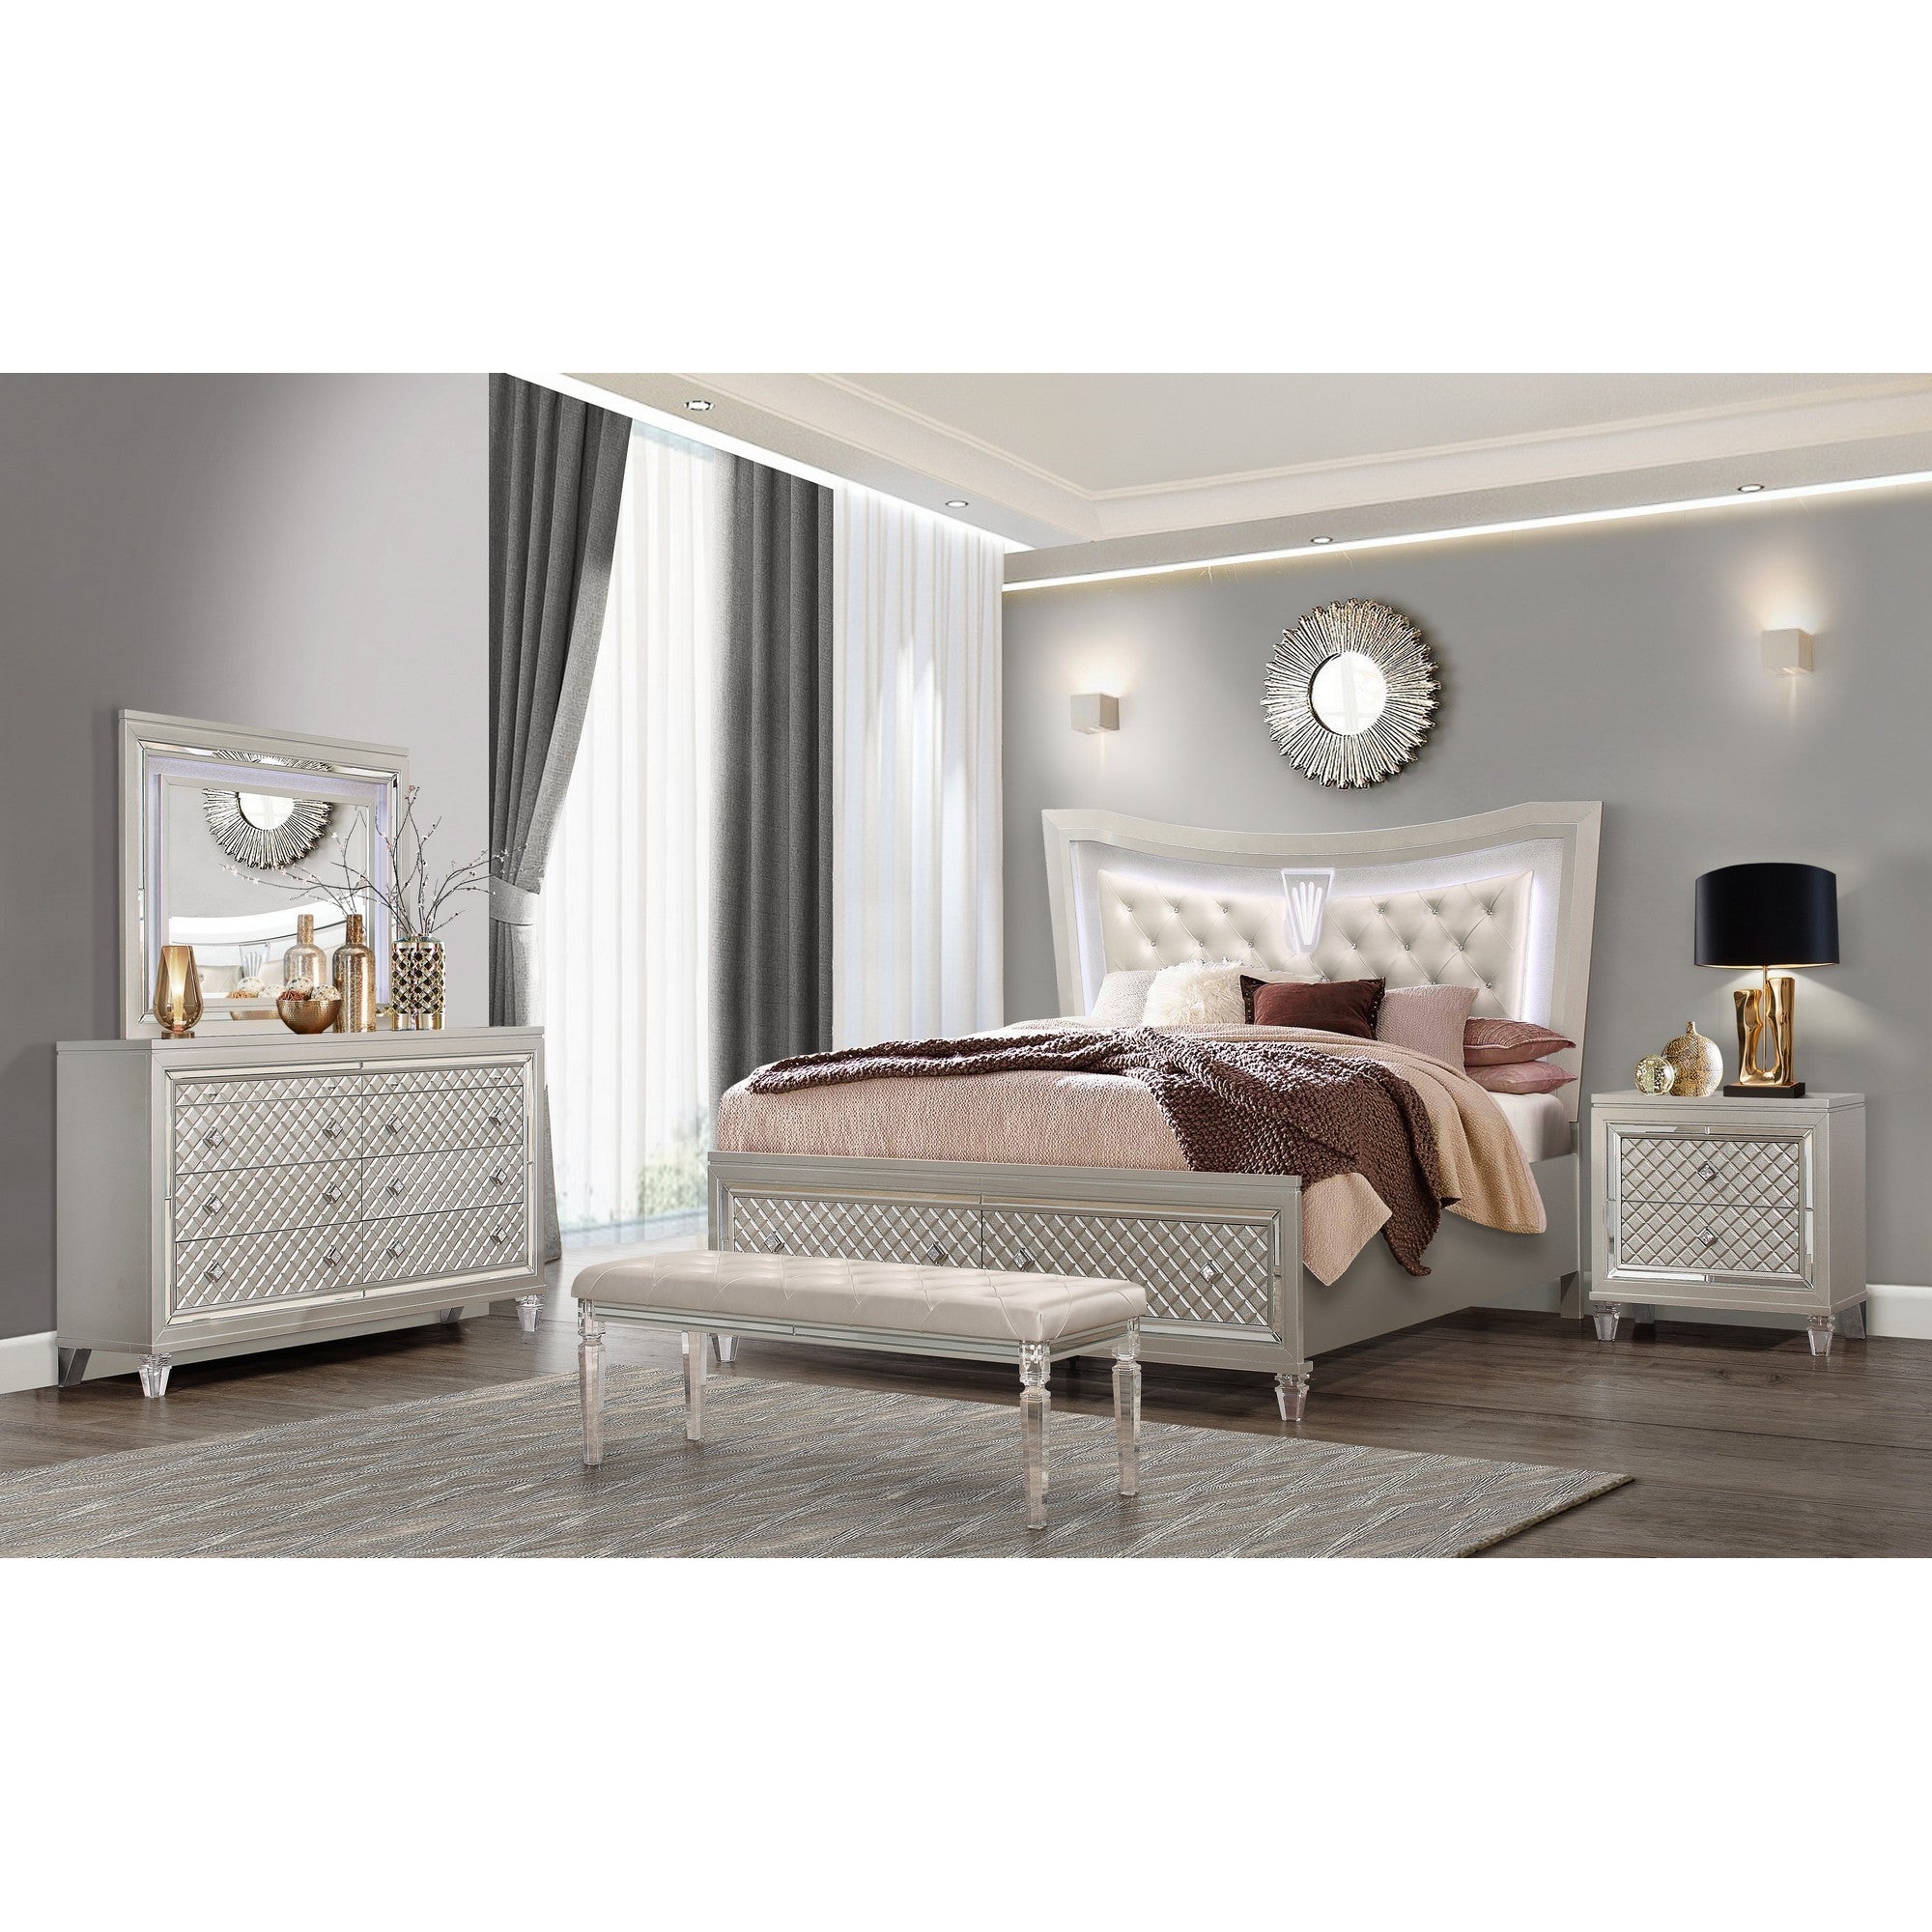 Champagne tone Queen Bed with padded headboard  LED lightning  2 drawer Default Title